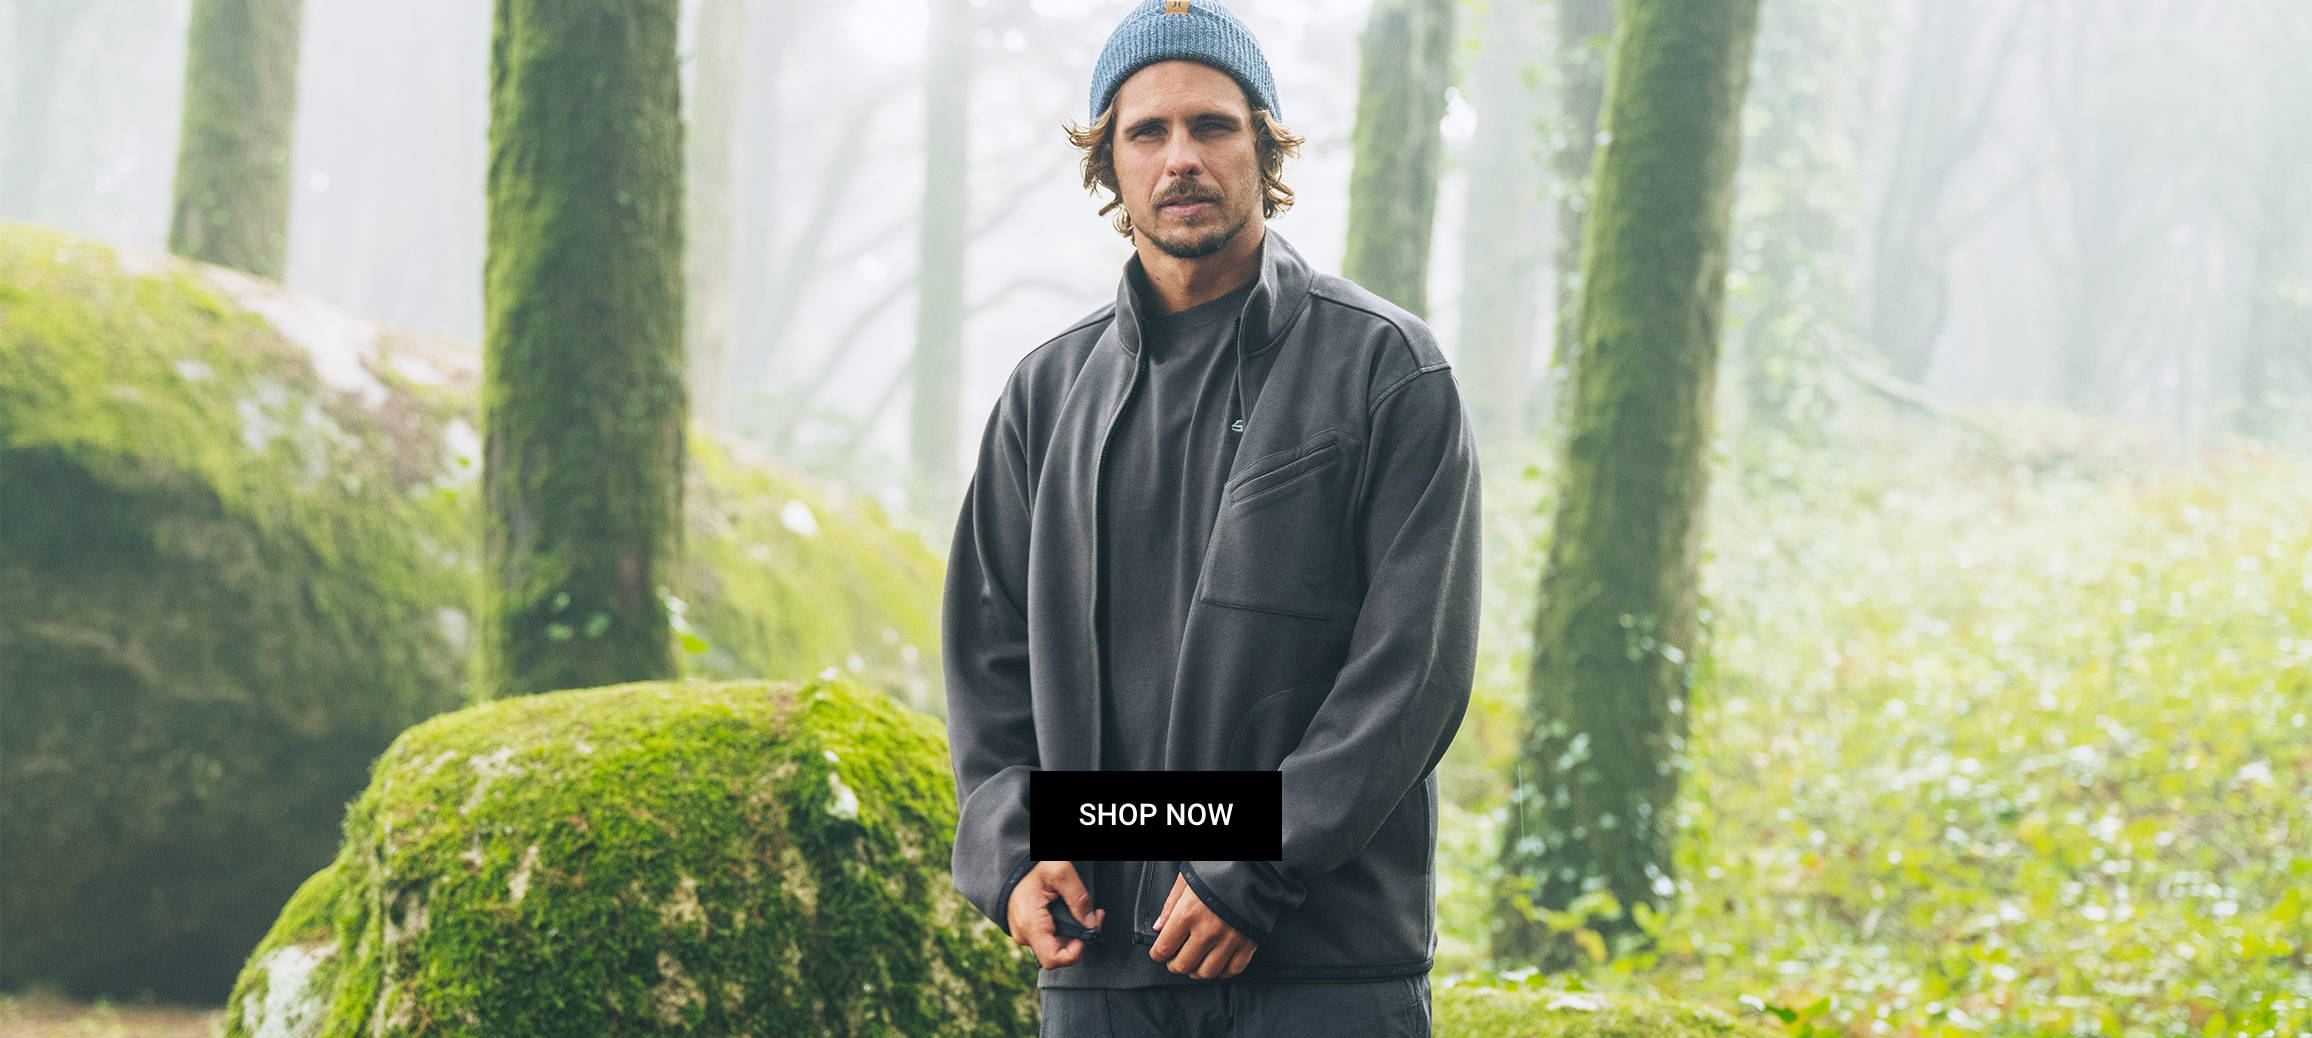 Hurley Explore Get Out There. Shop Now.